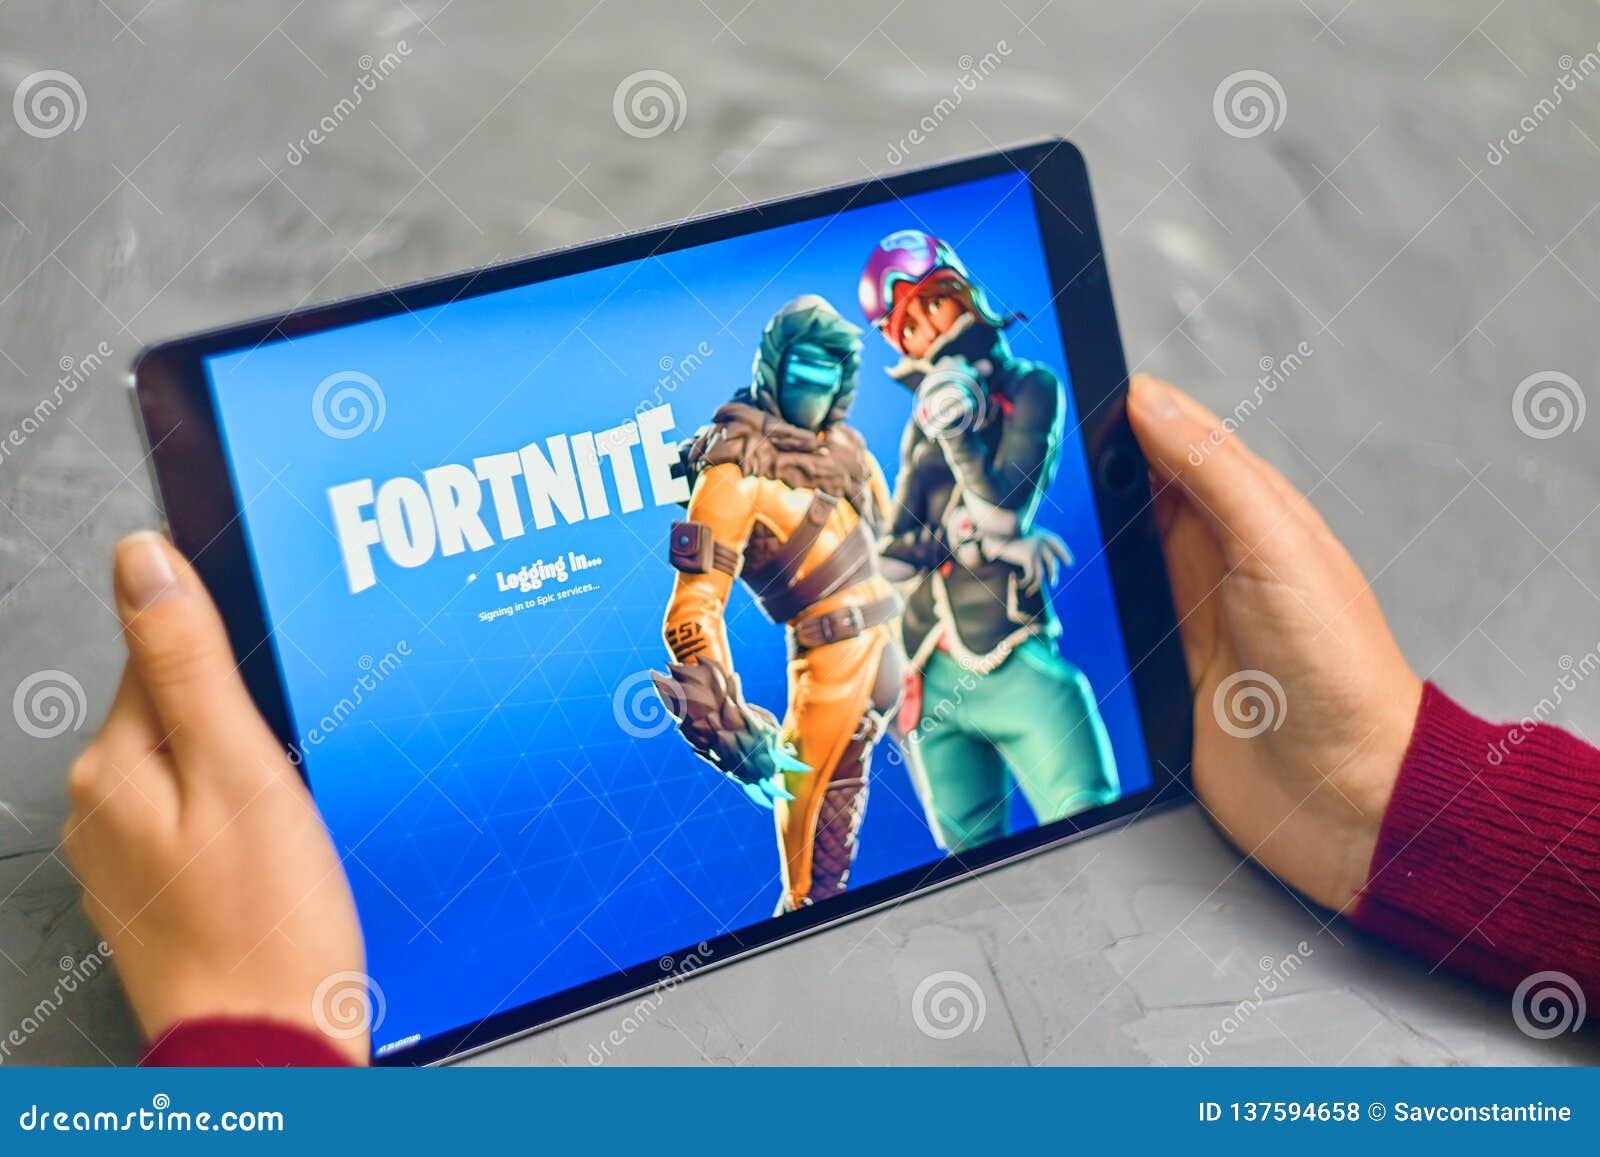 Fortnite Gameplay On Ipad Editorial Stock Photo Image Of Battle